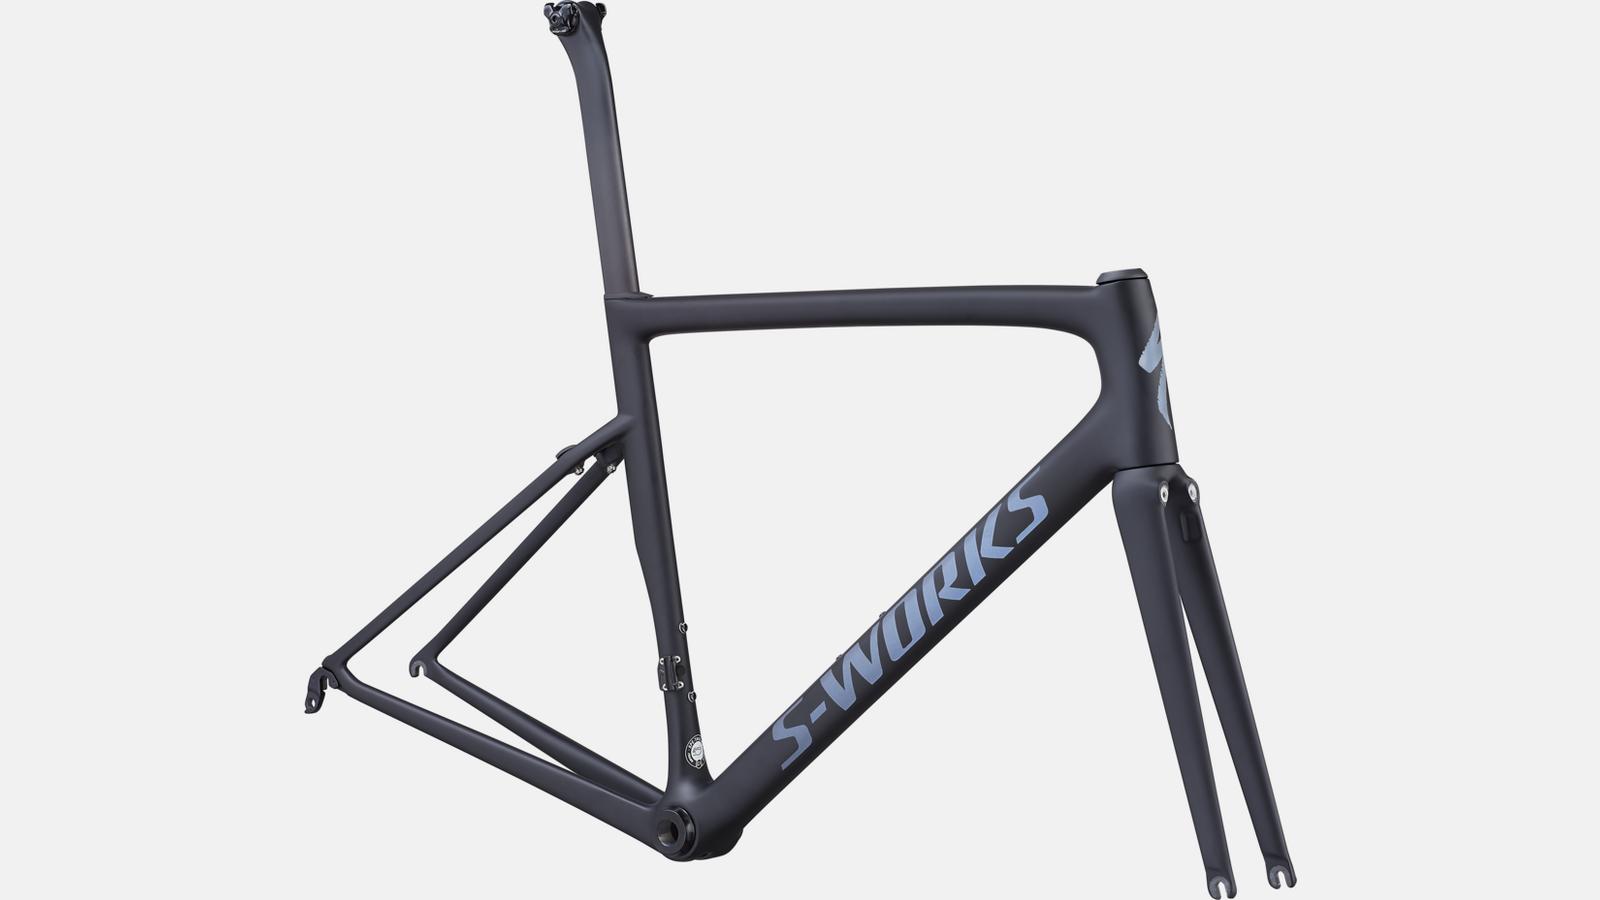 Touch-up paint for 2019 Specialized S-Works Tarmac SL6 Frameset - Satin Black